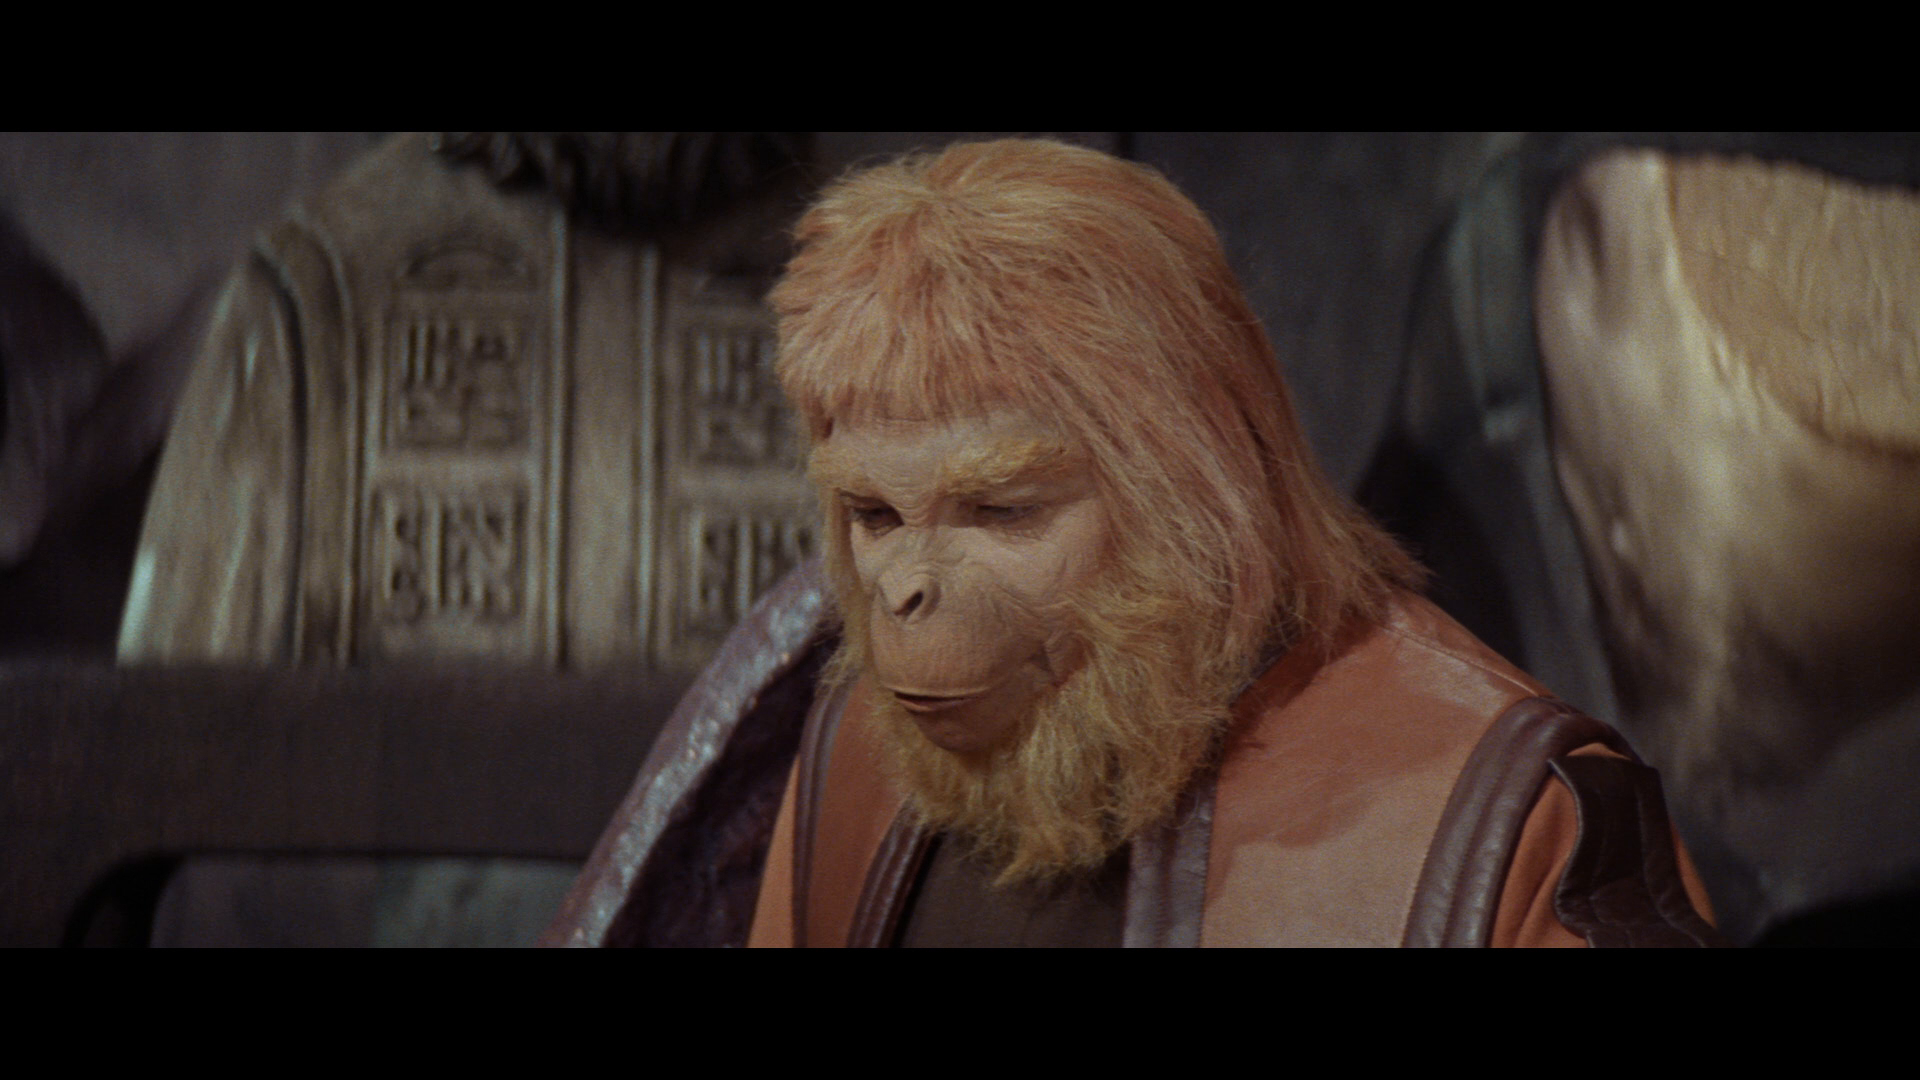 planet of the apes 1968 free download